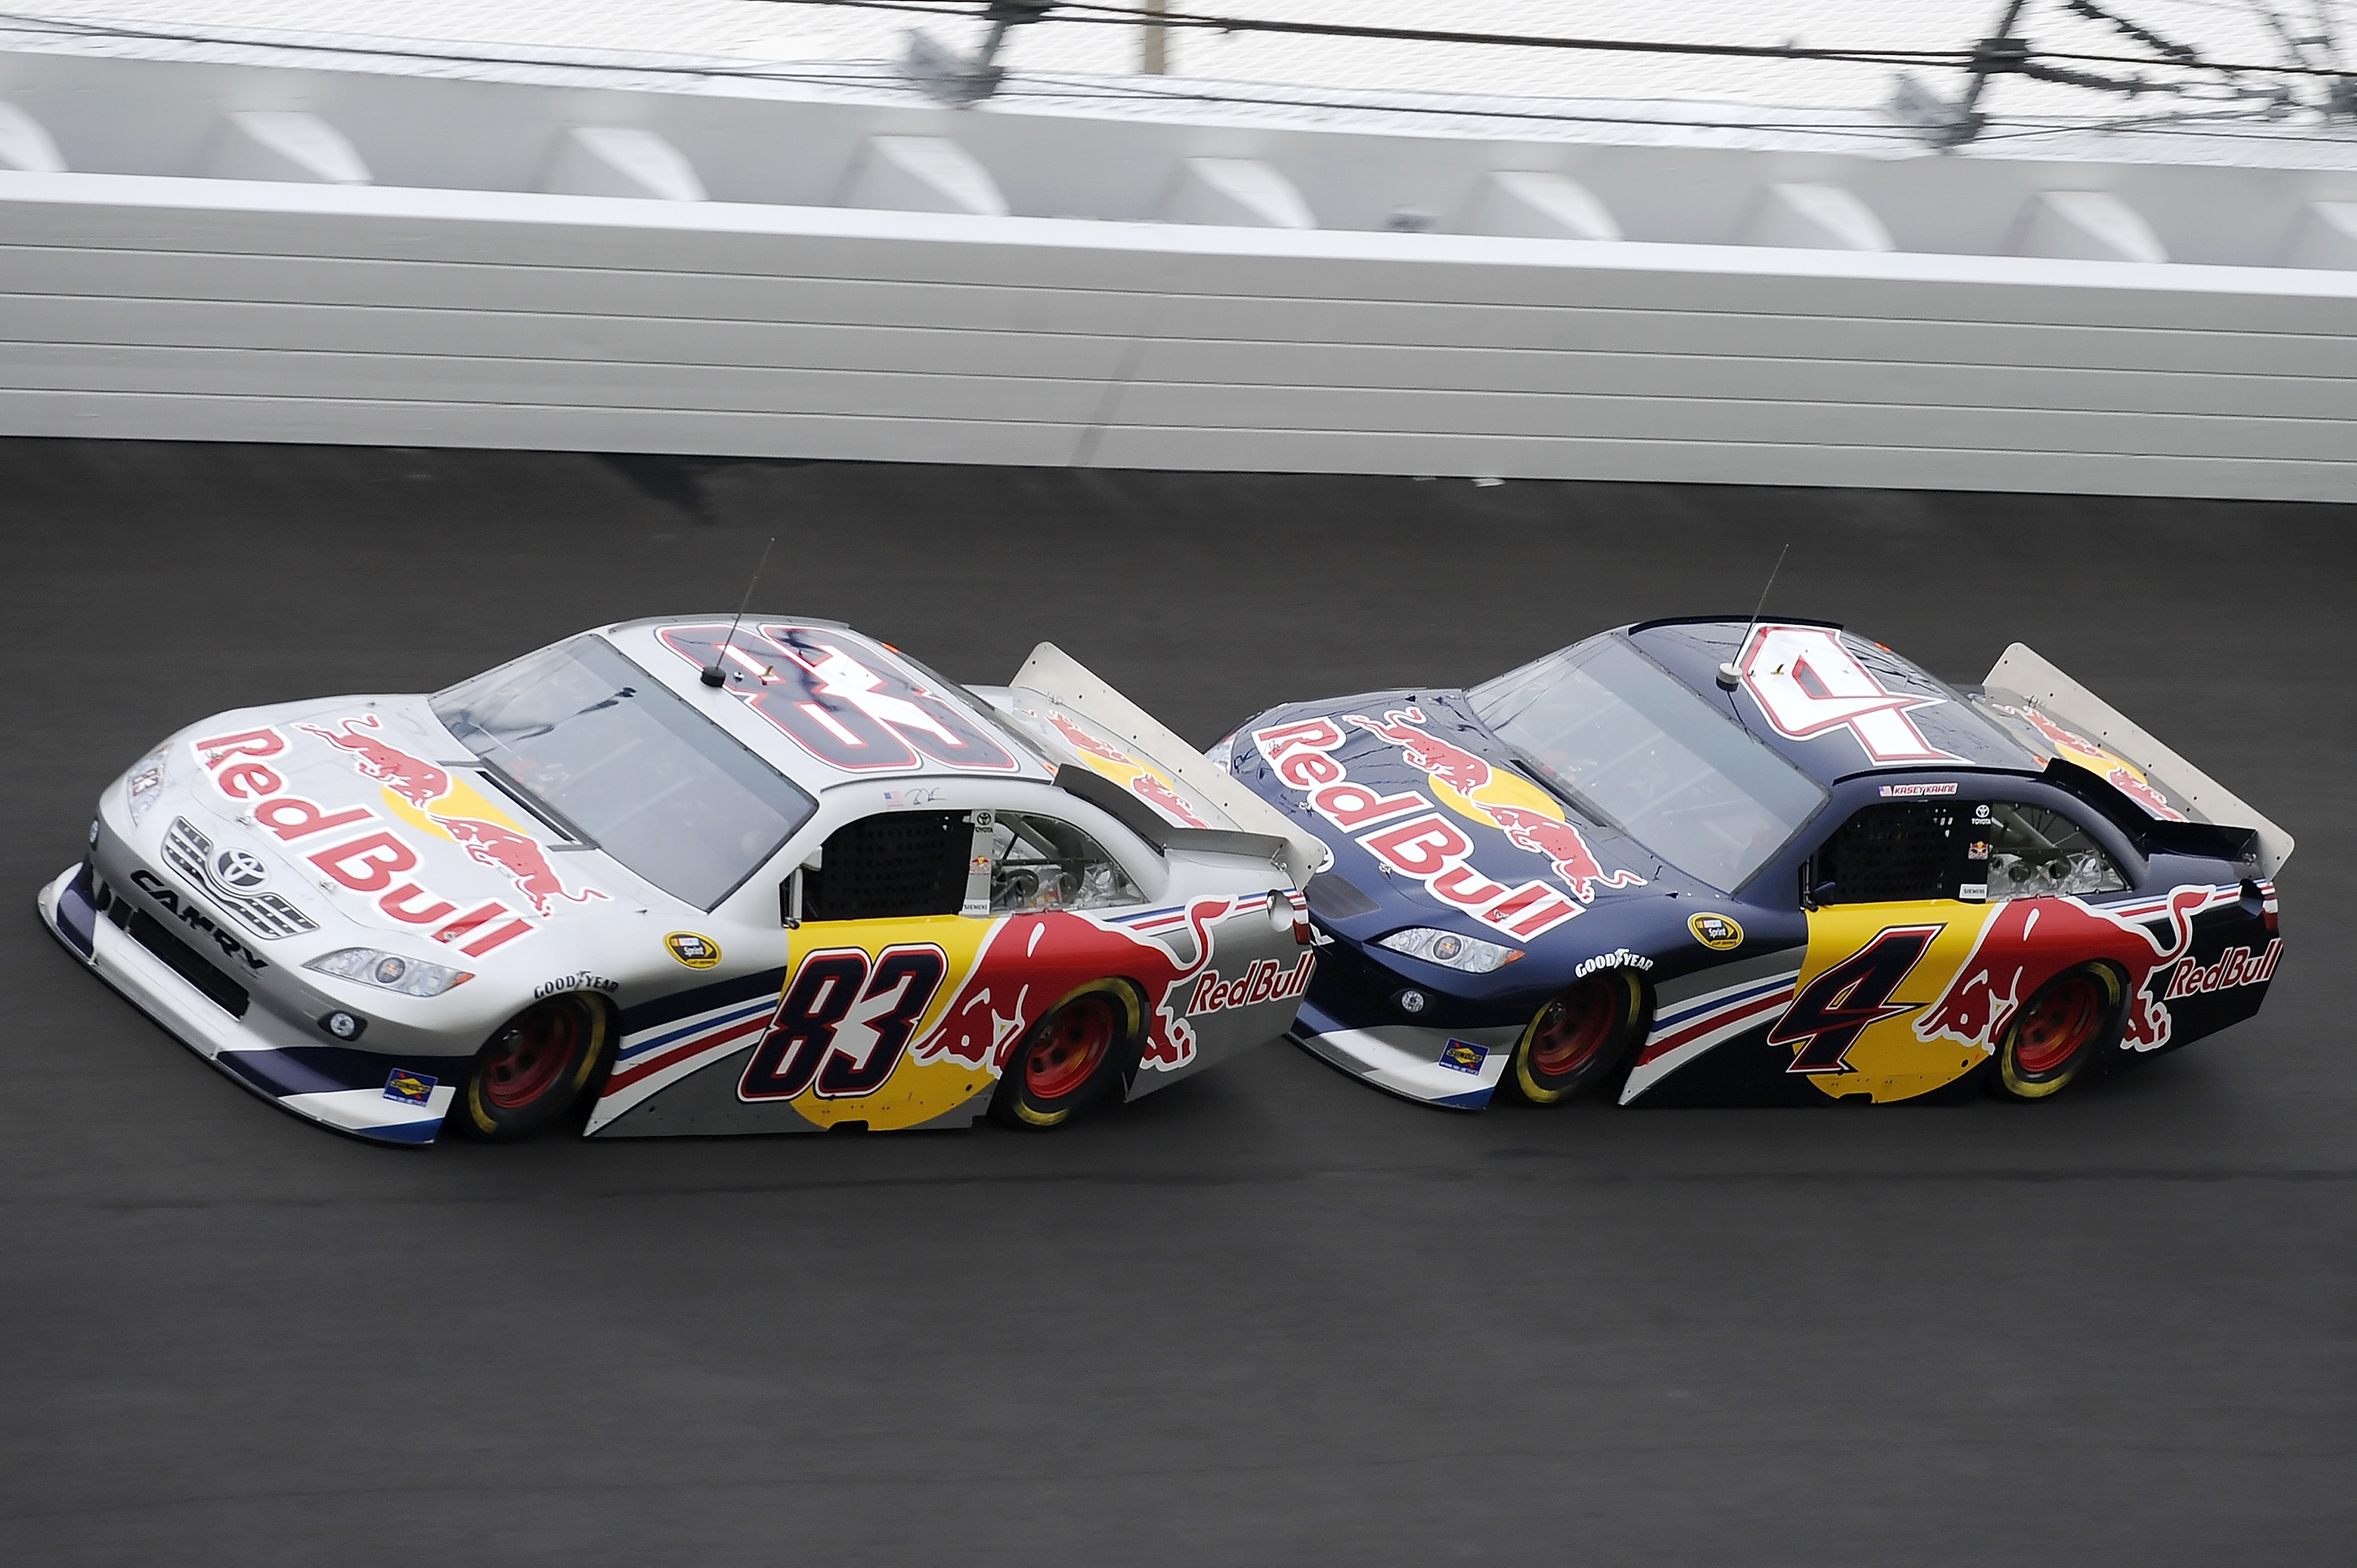 Brian Vickers (No. 83) and Kasey Kahne (No.4) have worked well toegether preparing for Daytona.